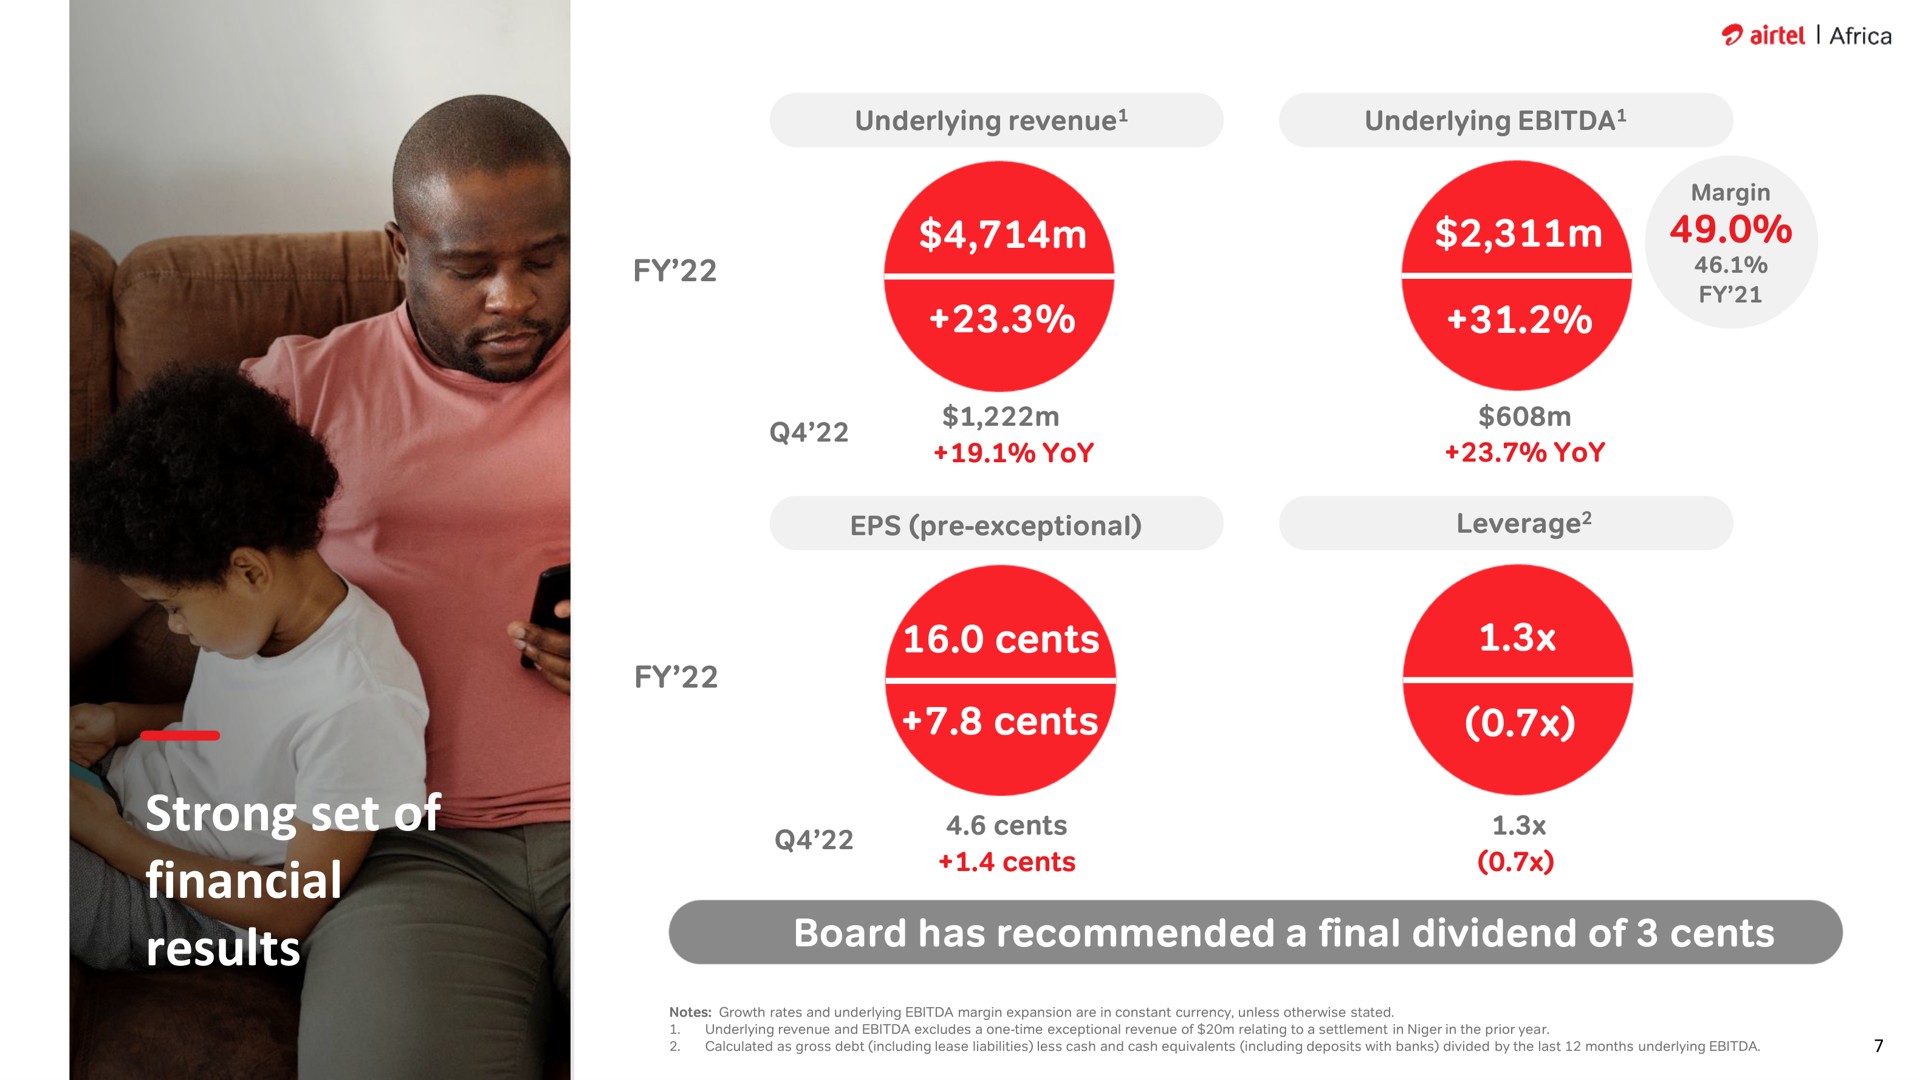 cents cents board has recommended a final dividend of cents strong set of financial results sage at raved | Airtel Africa